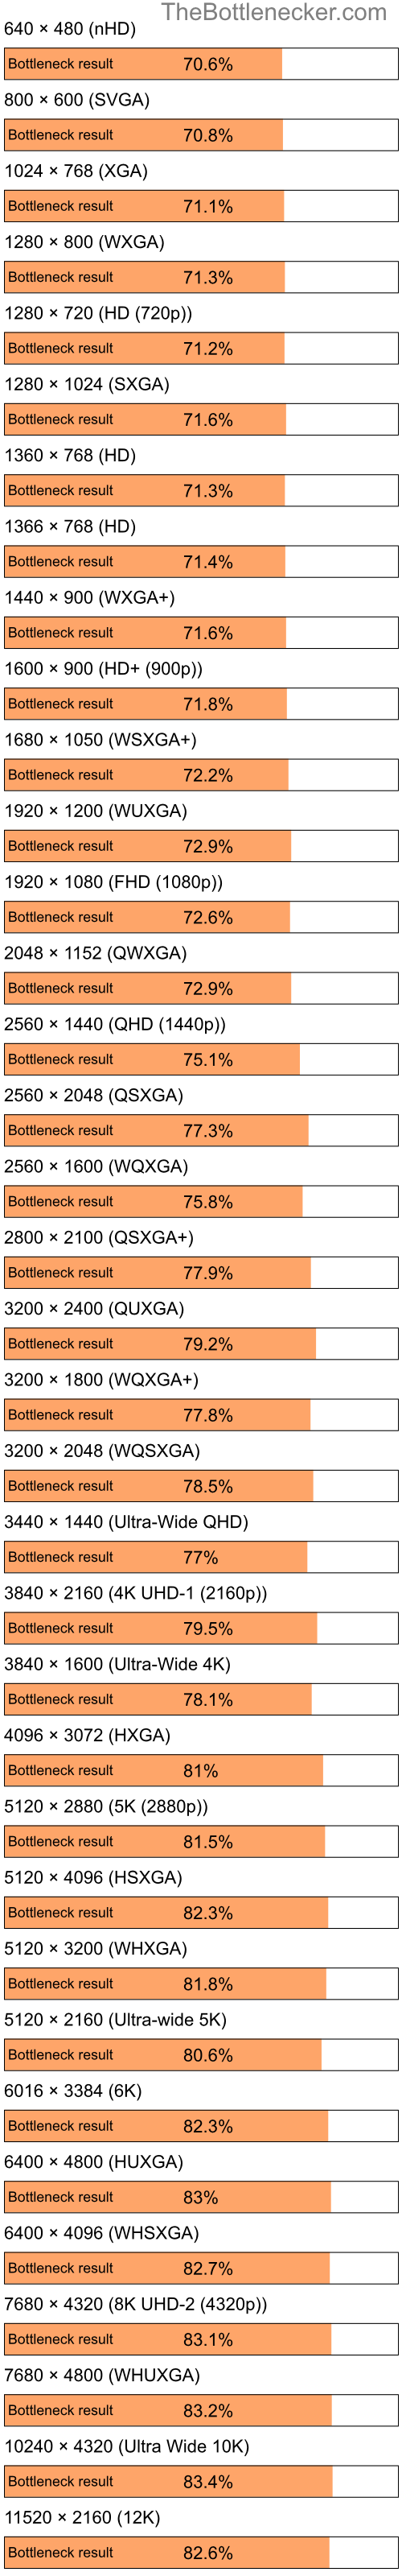 Bottleneck results by resolution for Intel Celeron M 420 and AMD Mobility Radeon HD 4250 in Graphic Card Intense Tasks